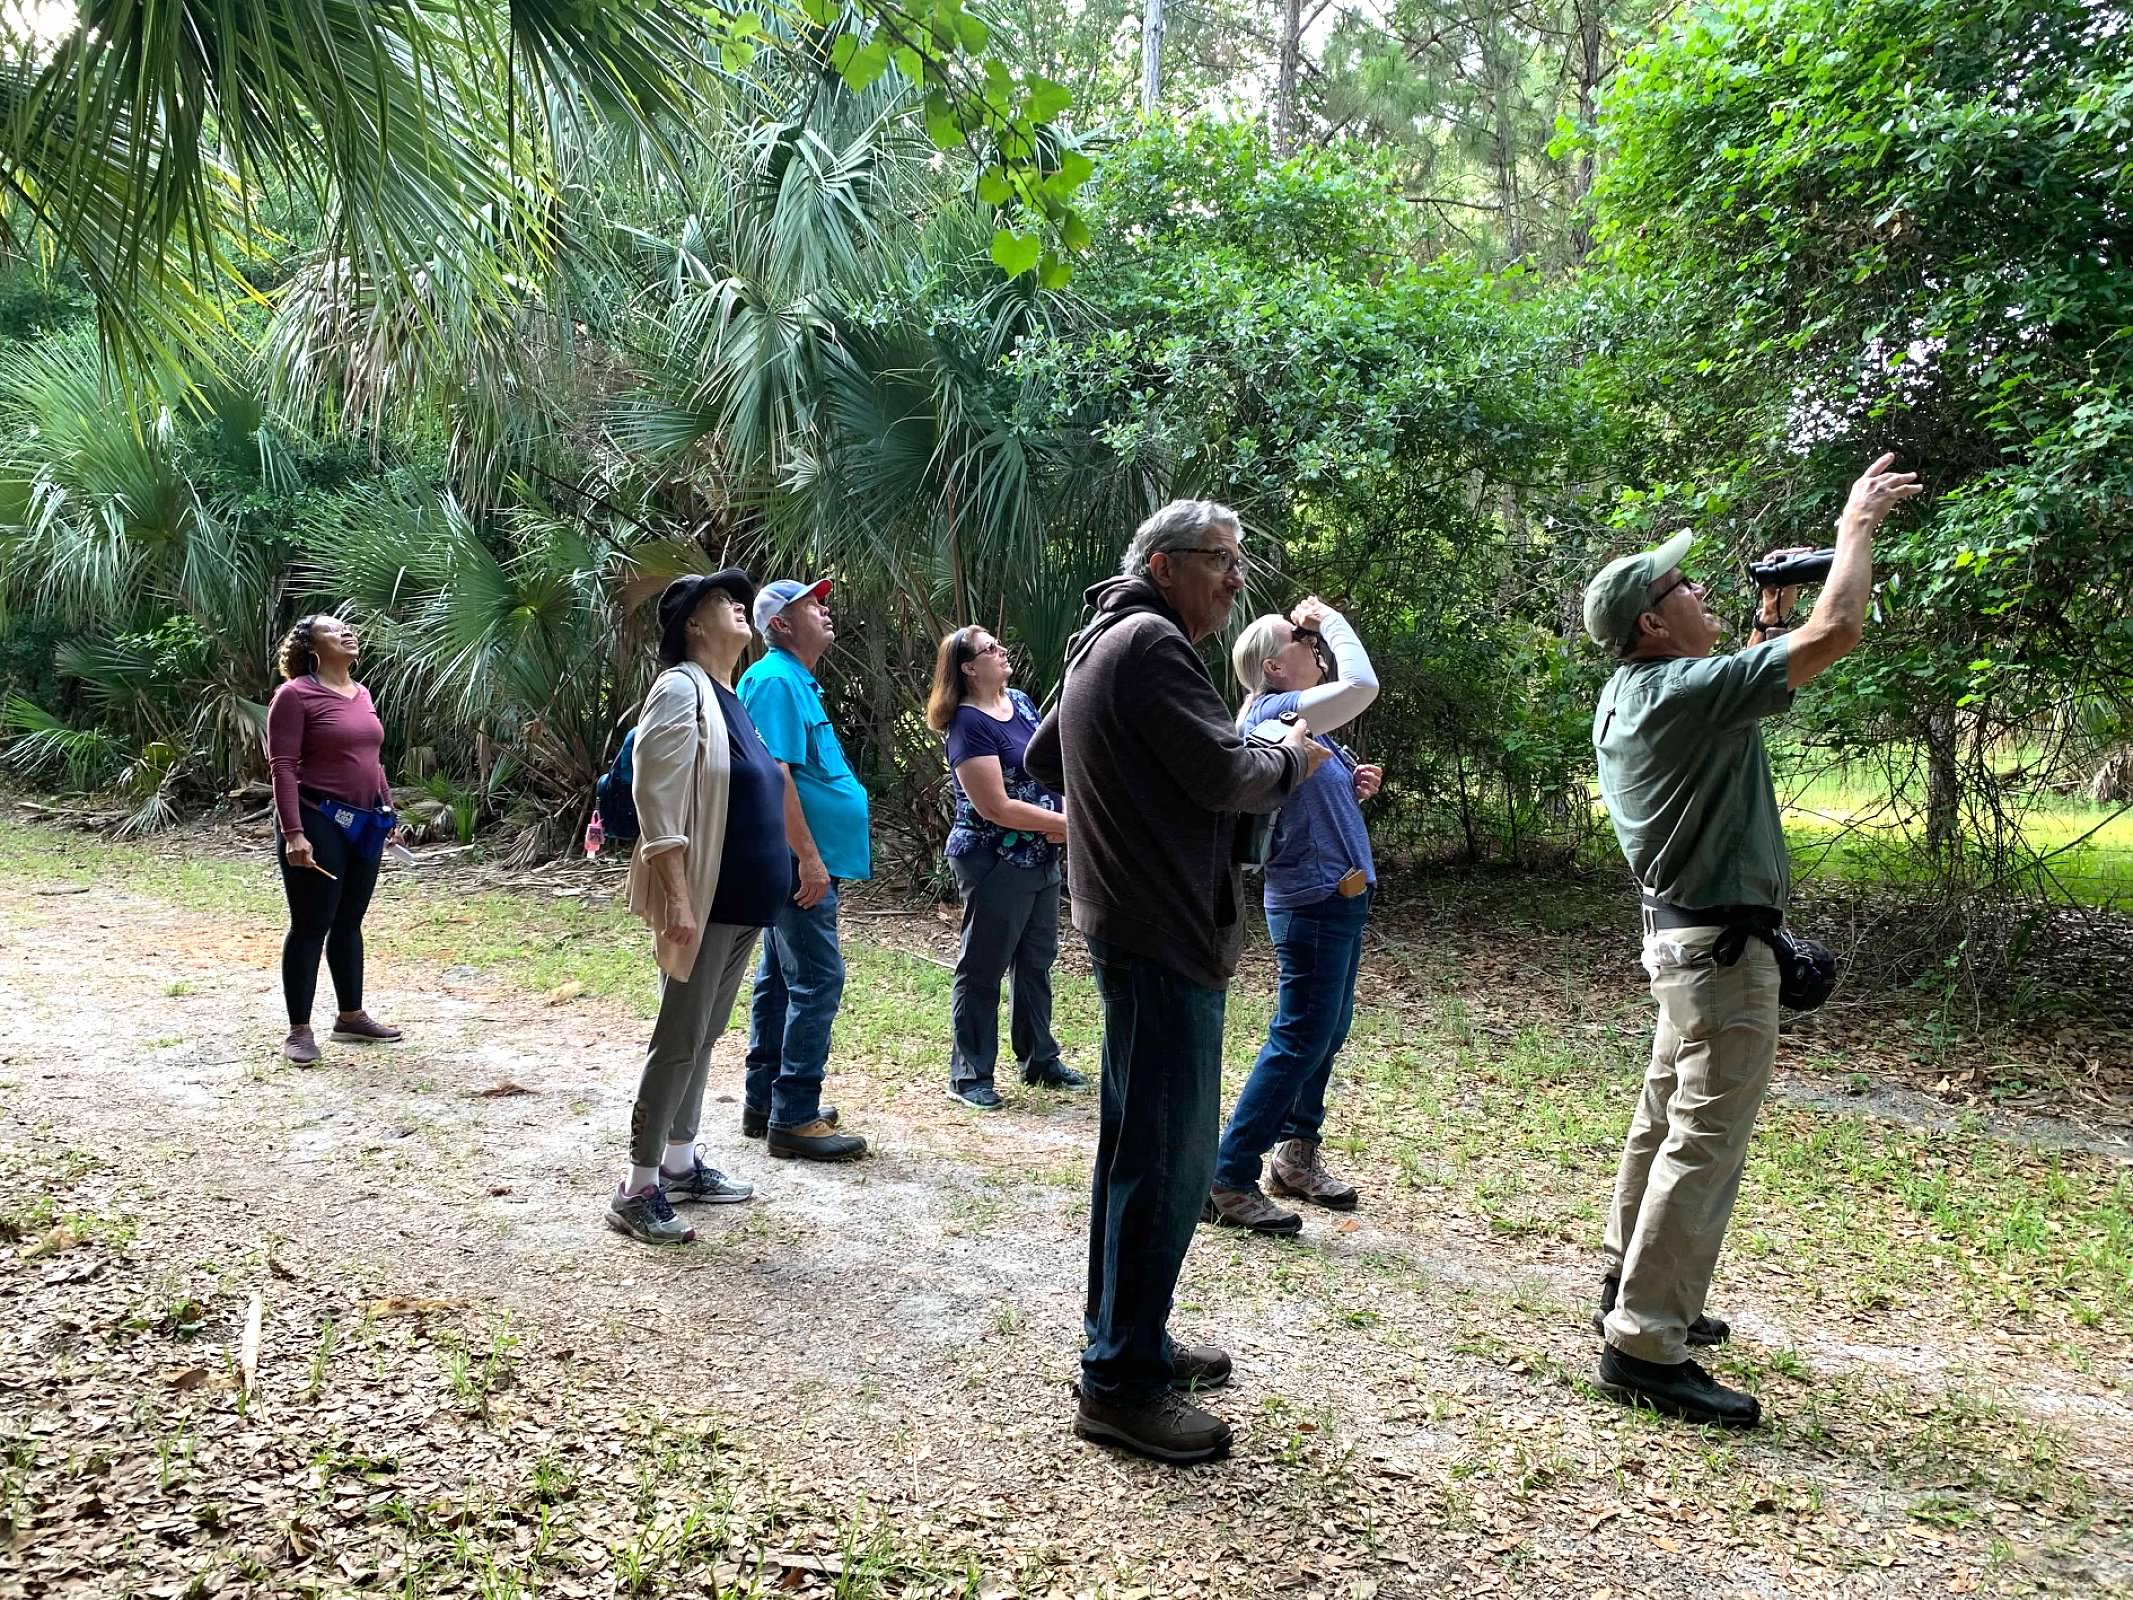 Hikers looking up with binoculars during a birding hike